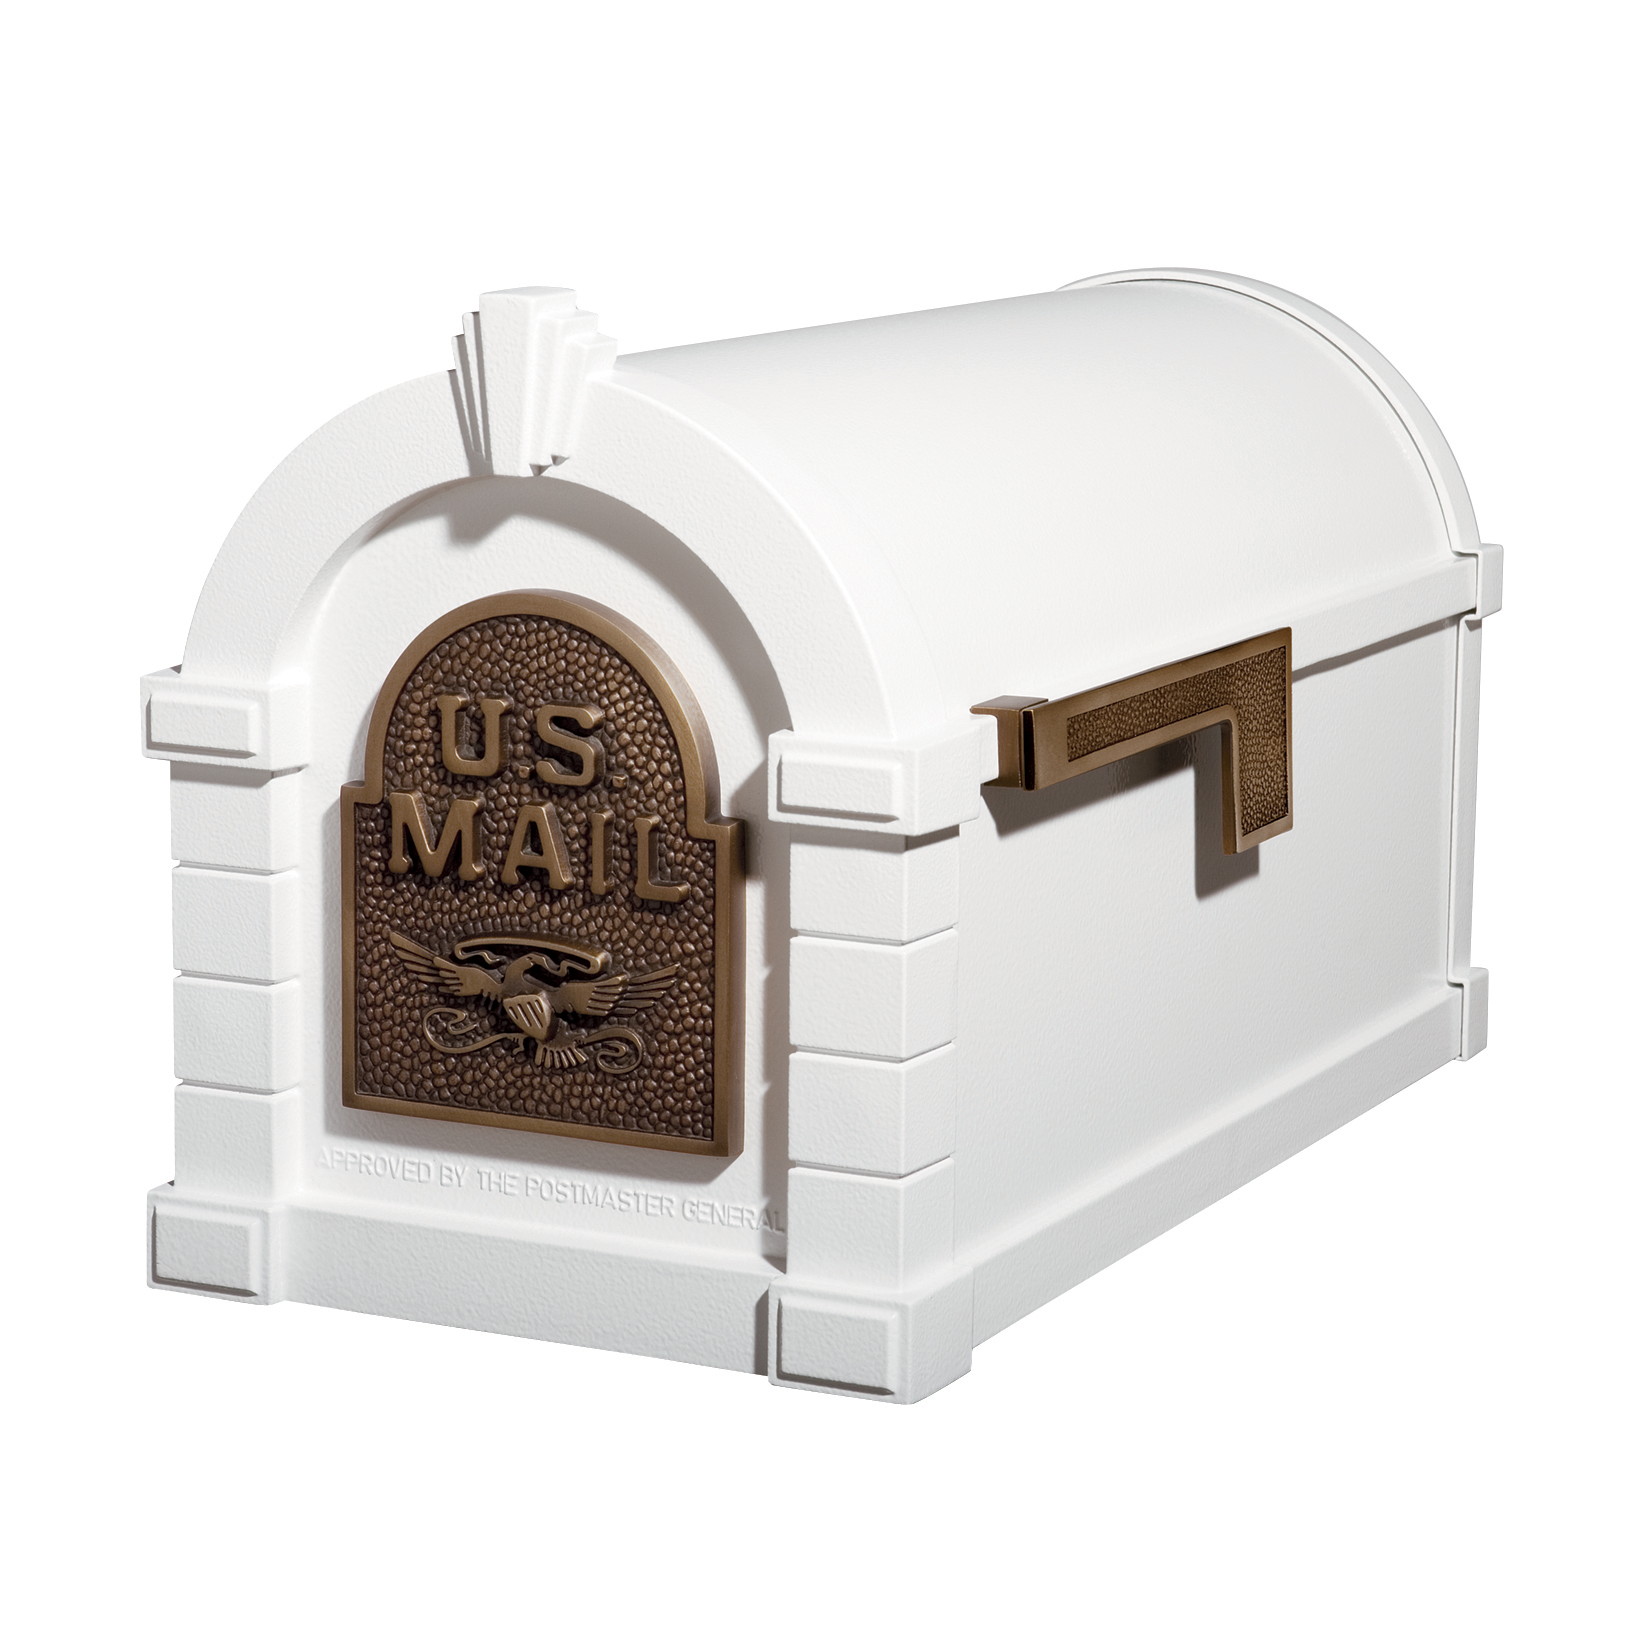 Gaines Eagle Keystone Mailboxes - White with Antique Bronze